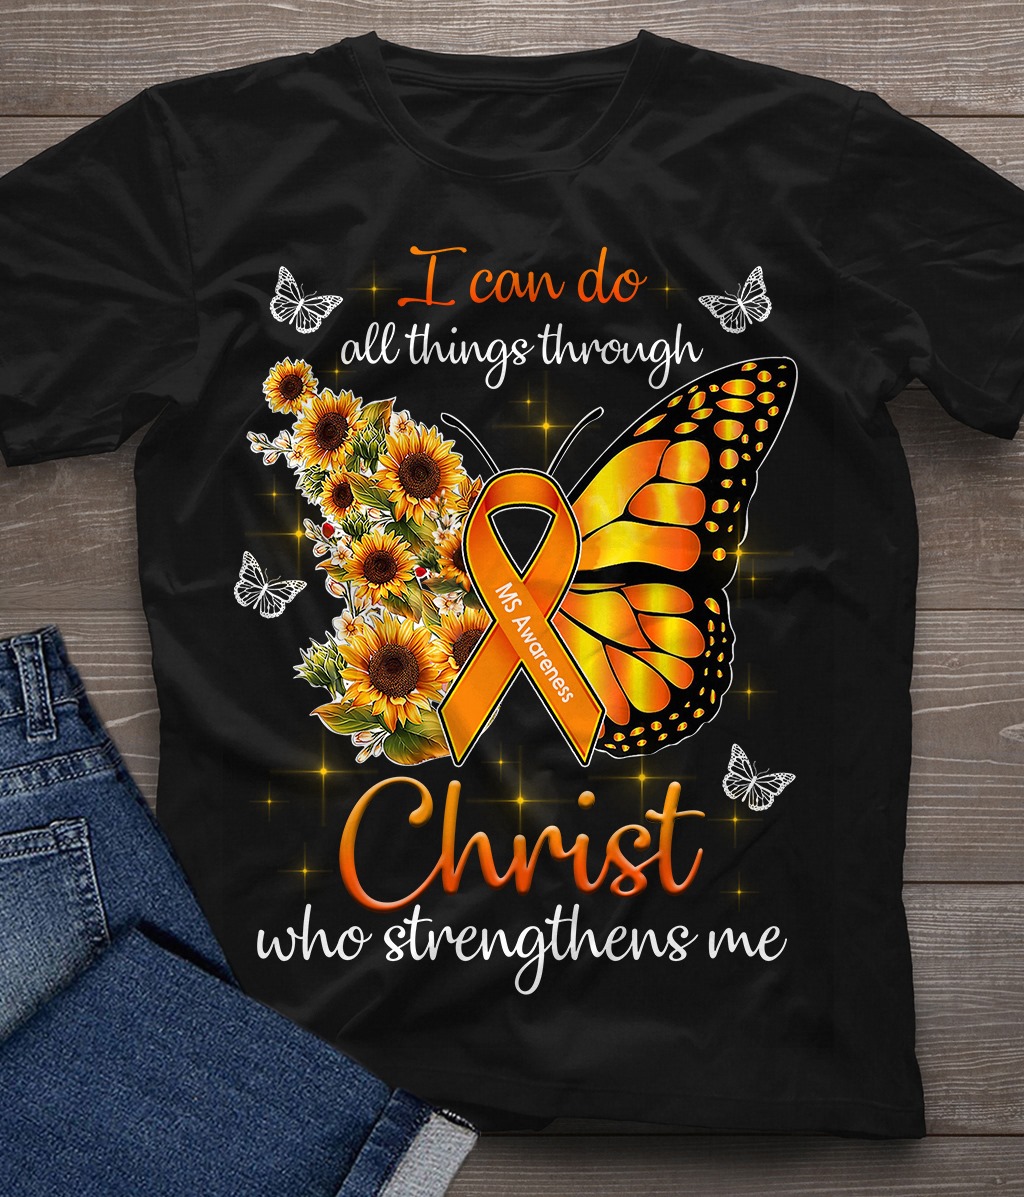 I can do all things through Christ who strengthens me - Multiple sclerosis awareness